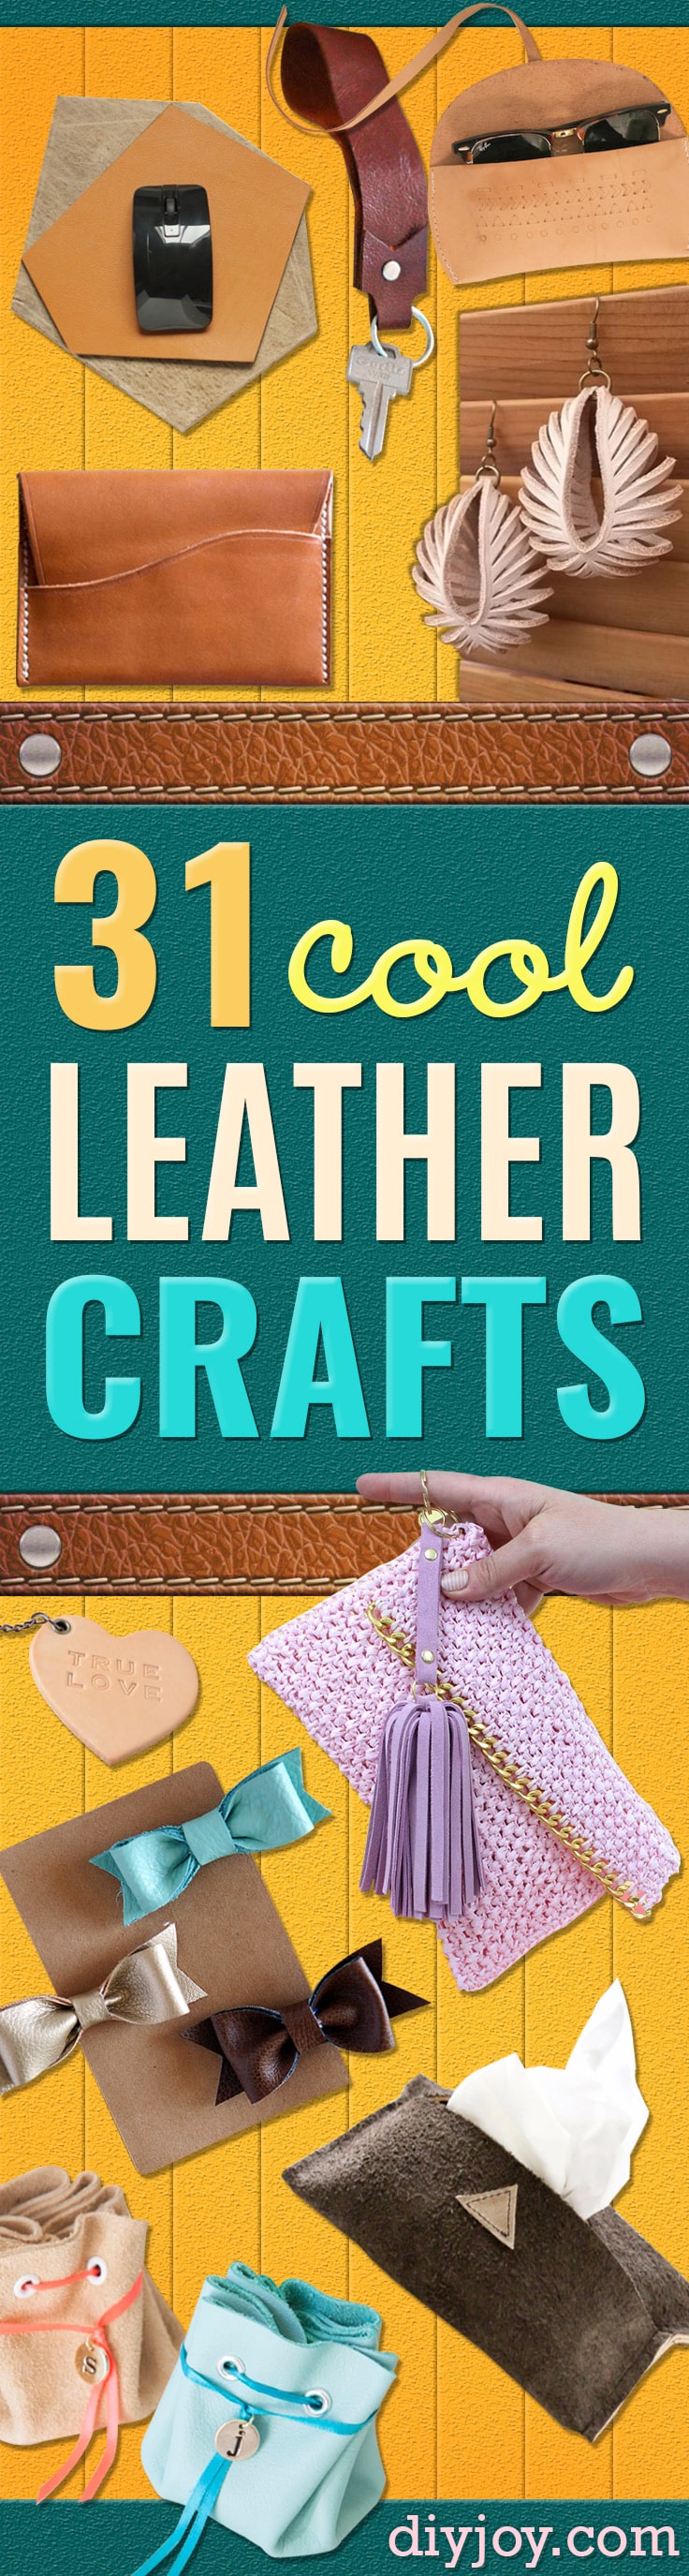  Creative Leather Crafts - Best DIY Projects Made With Leather - Easy Handmade Do It Yourself Gifts and Fashion - Cool Crafts and DYI Leather Projects With Step by Step Tutorials http://diyjoy.com/diy-leather-crafts